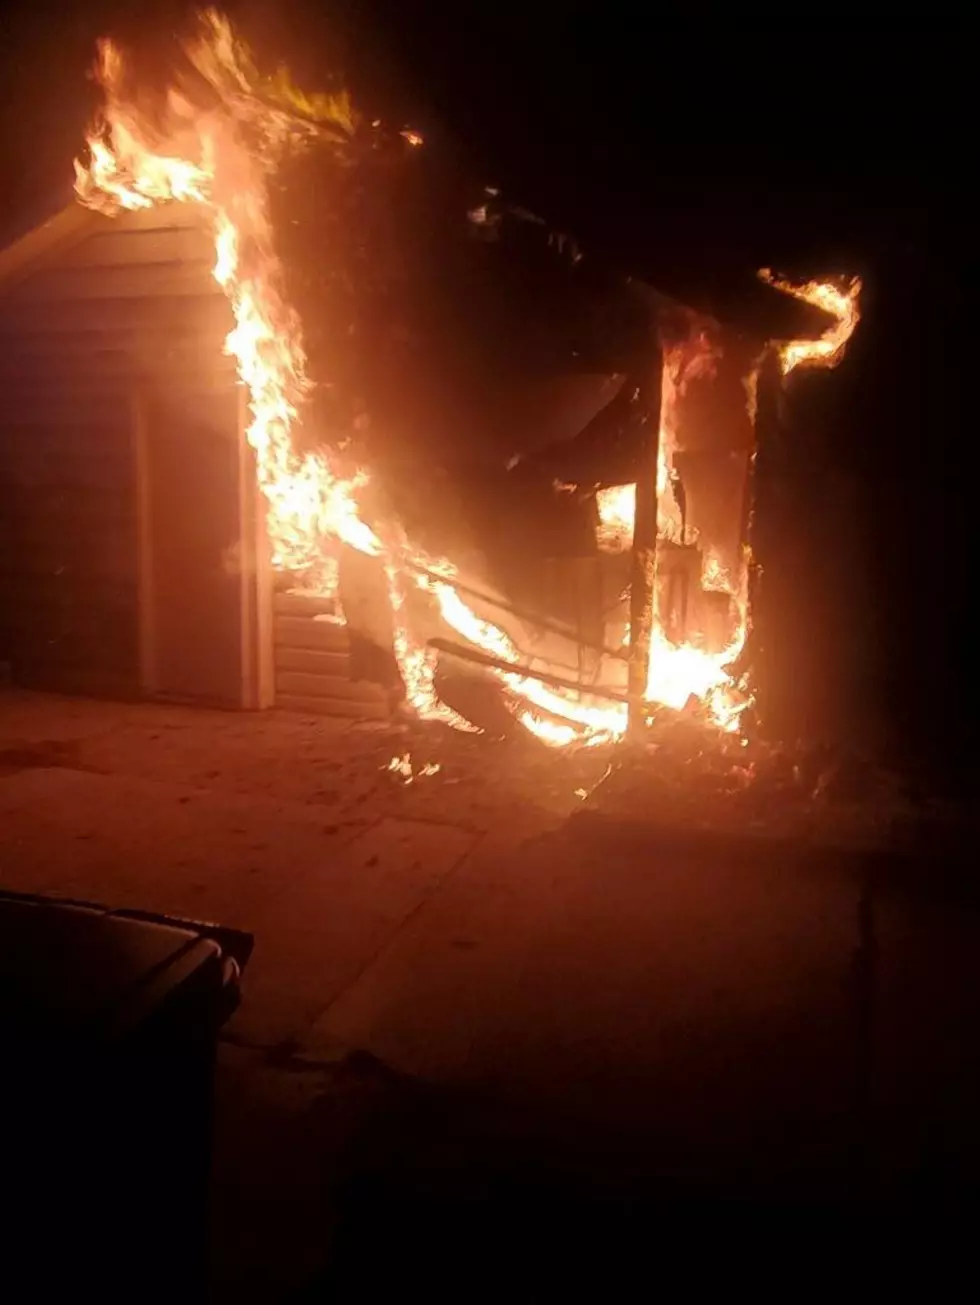 Island Heights Firefighters douse flames from home garage